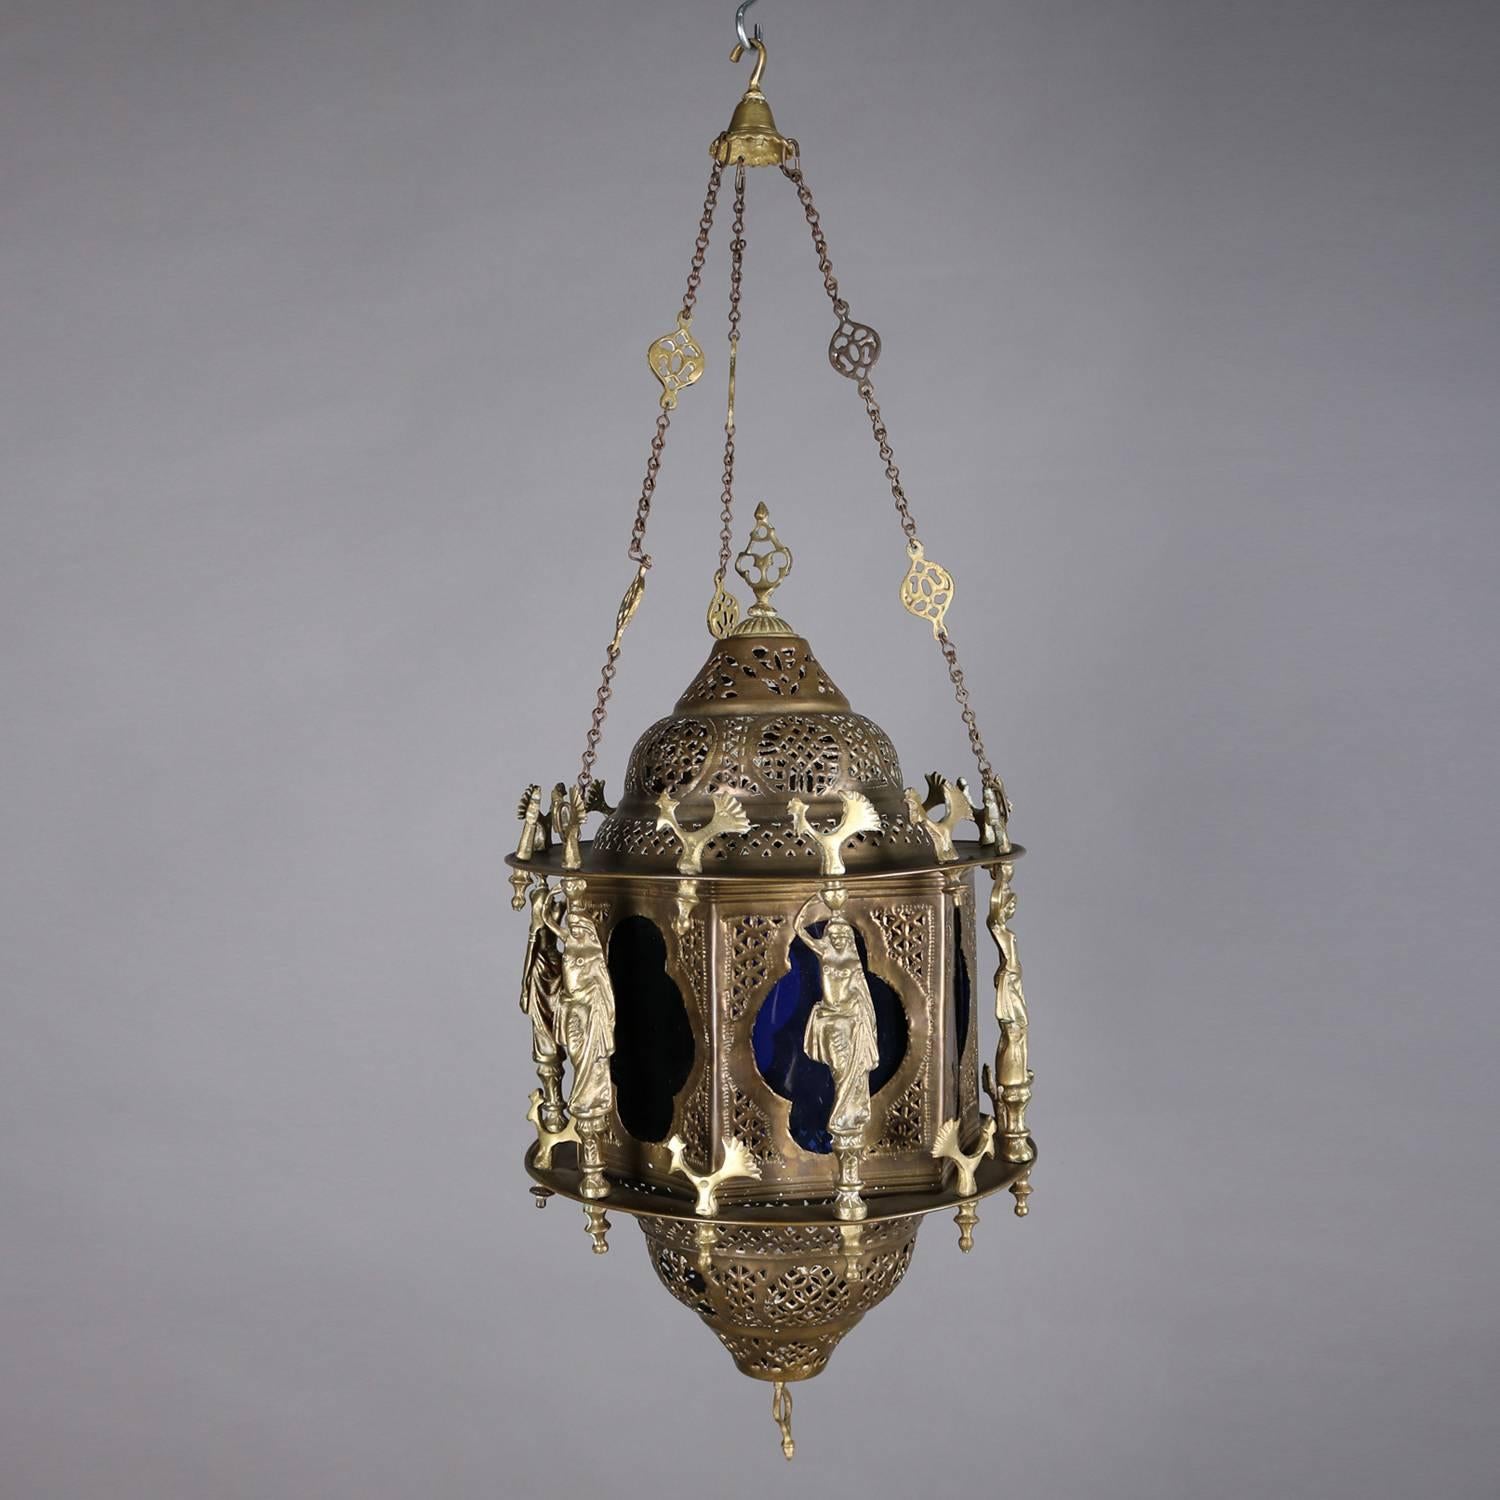 Antique Moorish hanging lantern features reticulated frame with figural supports of partial nude female figures with water vessels and alternating figural stylized birds/chickens, glass is cobalt blue, Persian, Moroccan, Turkish, not electrified,